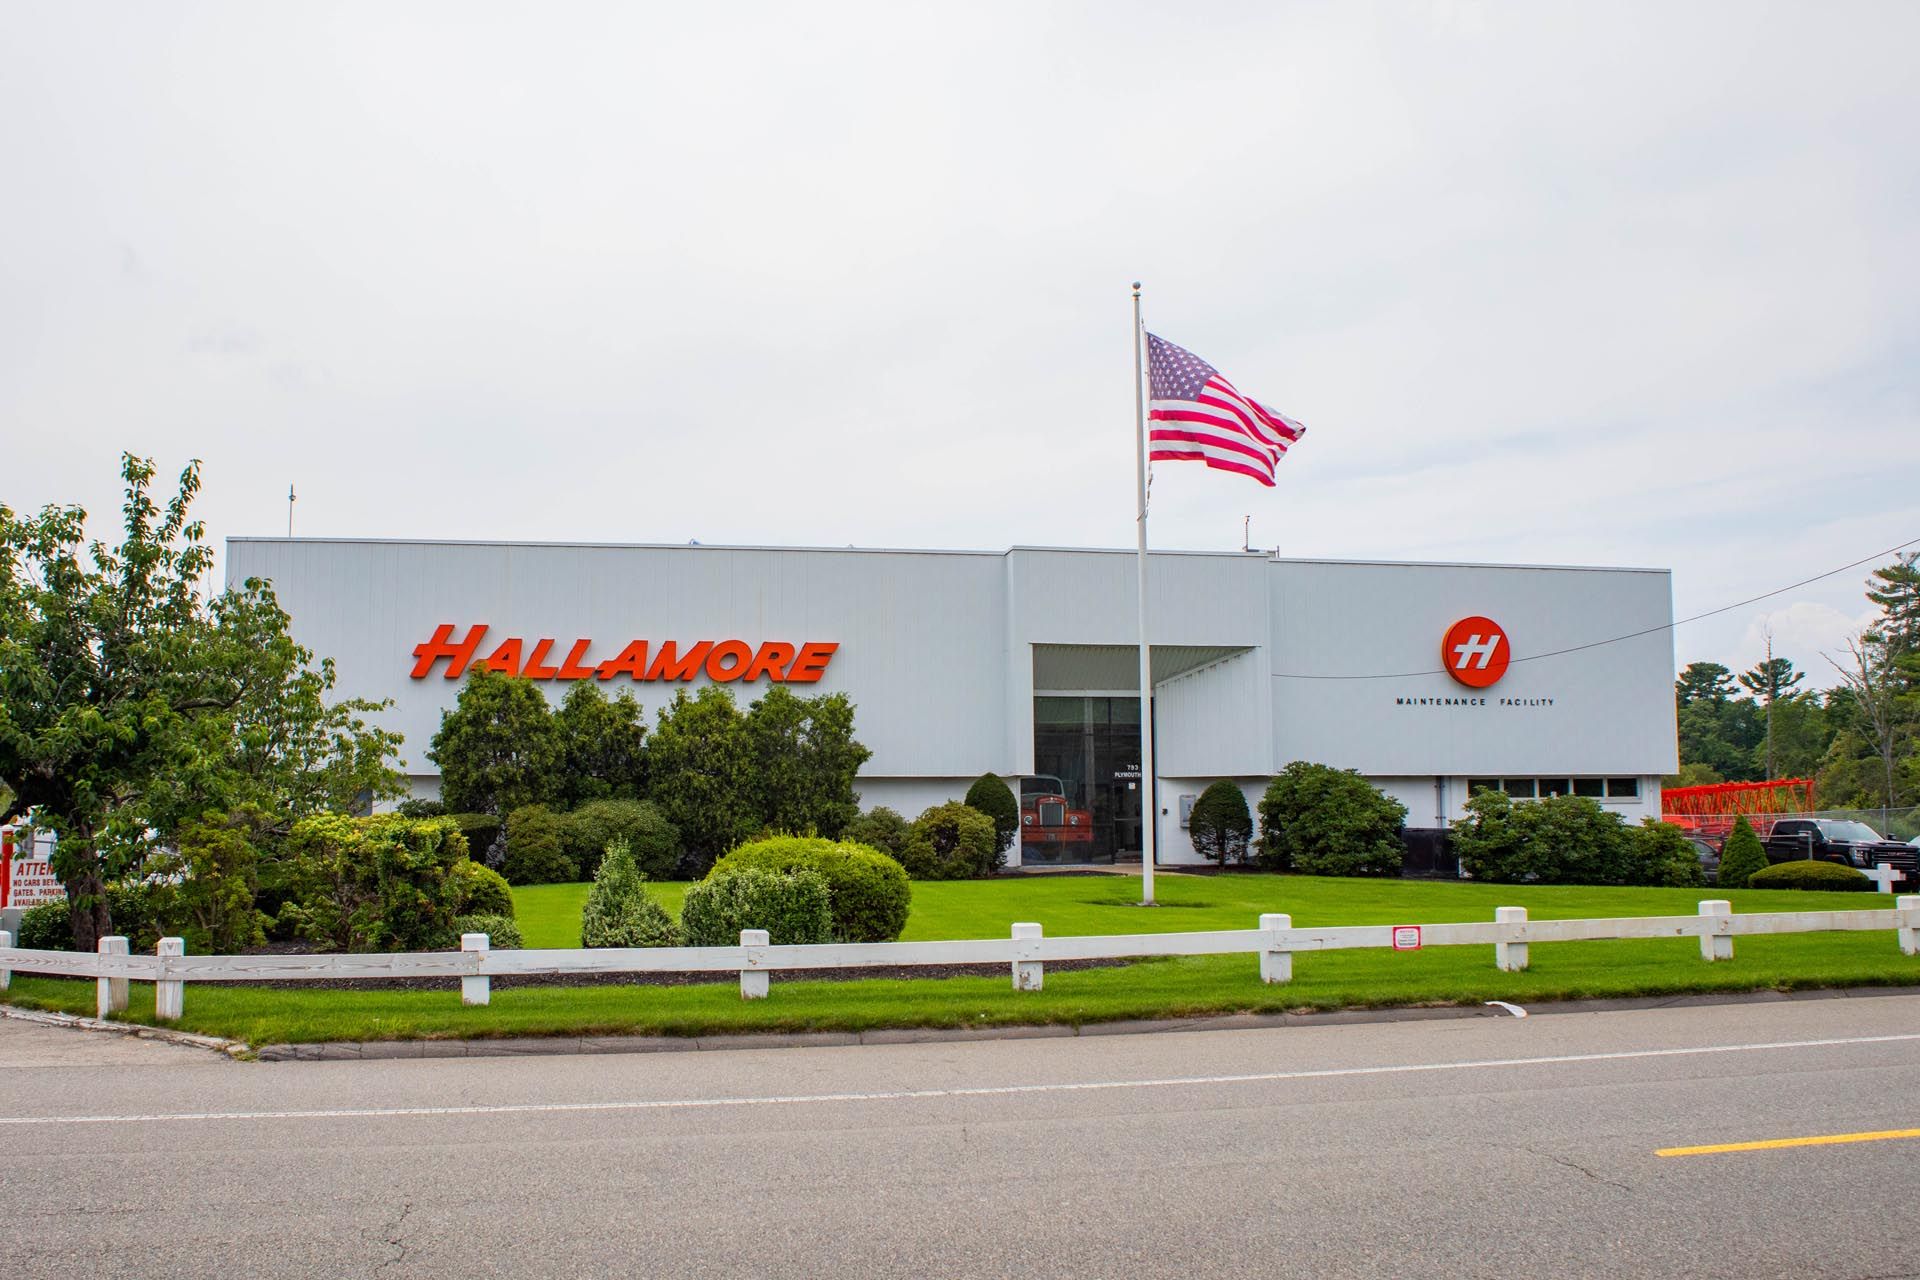 Hallamore Co. provides commercial crane, rigging, trucking, and 3PL warehousing solutions.